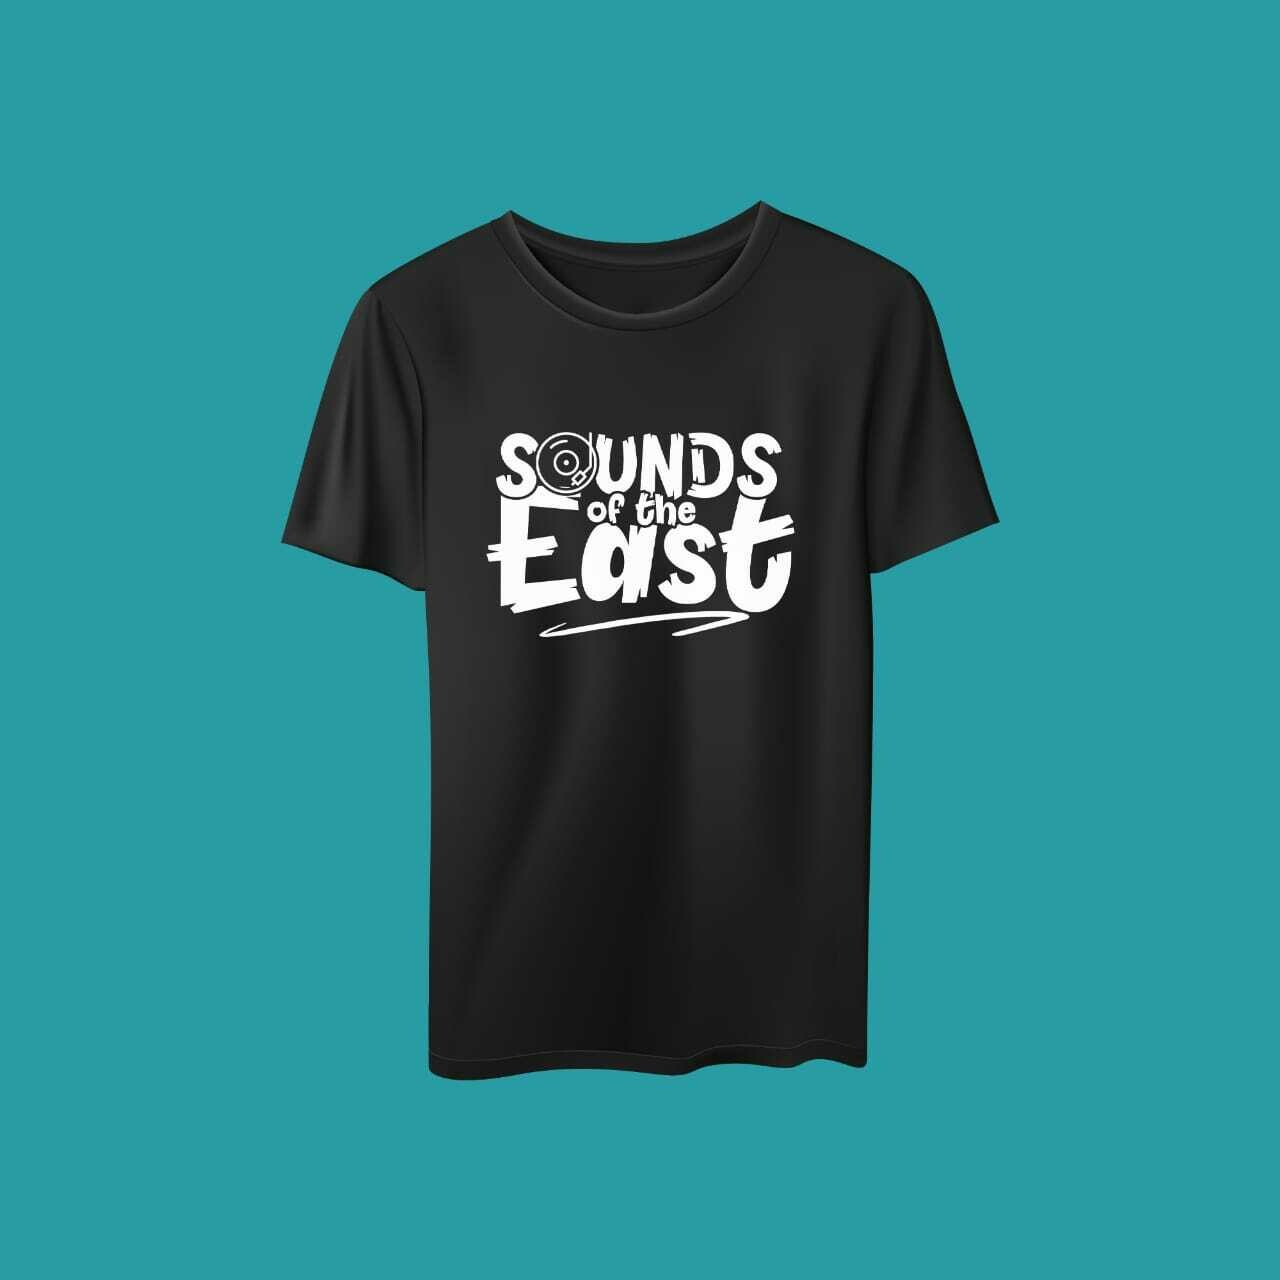 Sounds of the East Tee Black